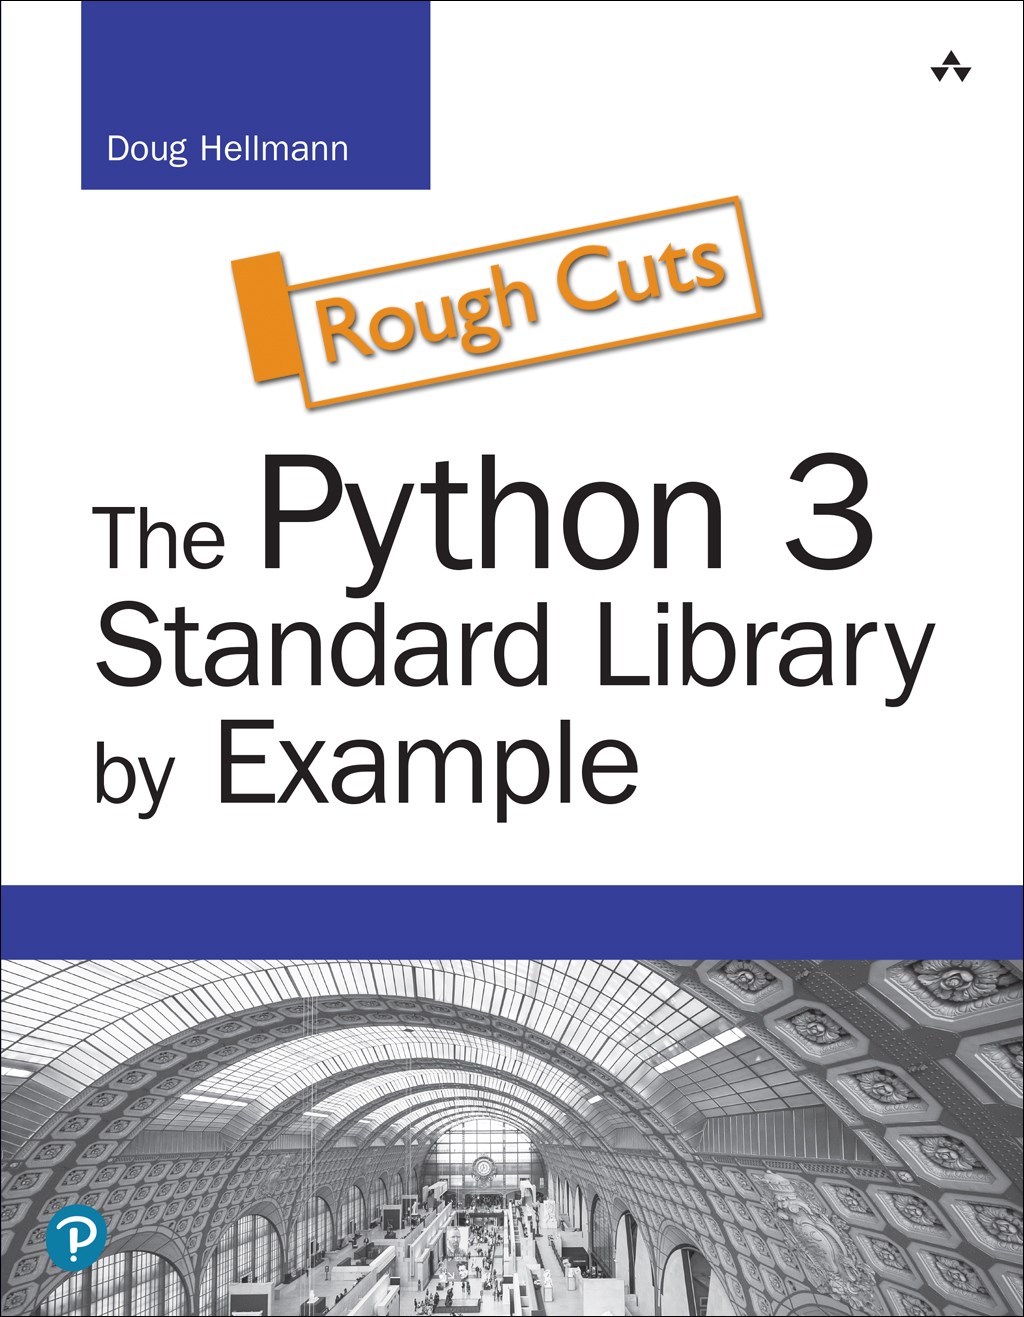 Python 3 Standard Library by Example, Rough Cuts, The